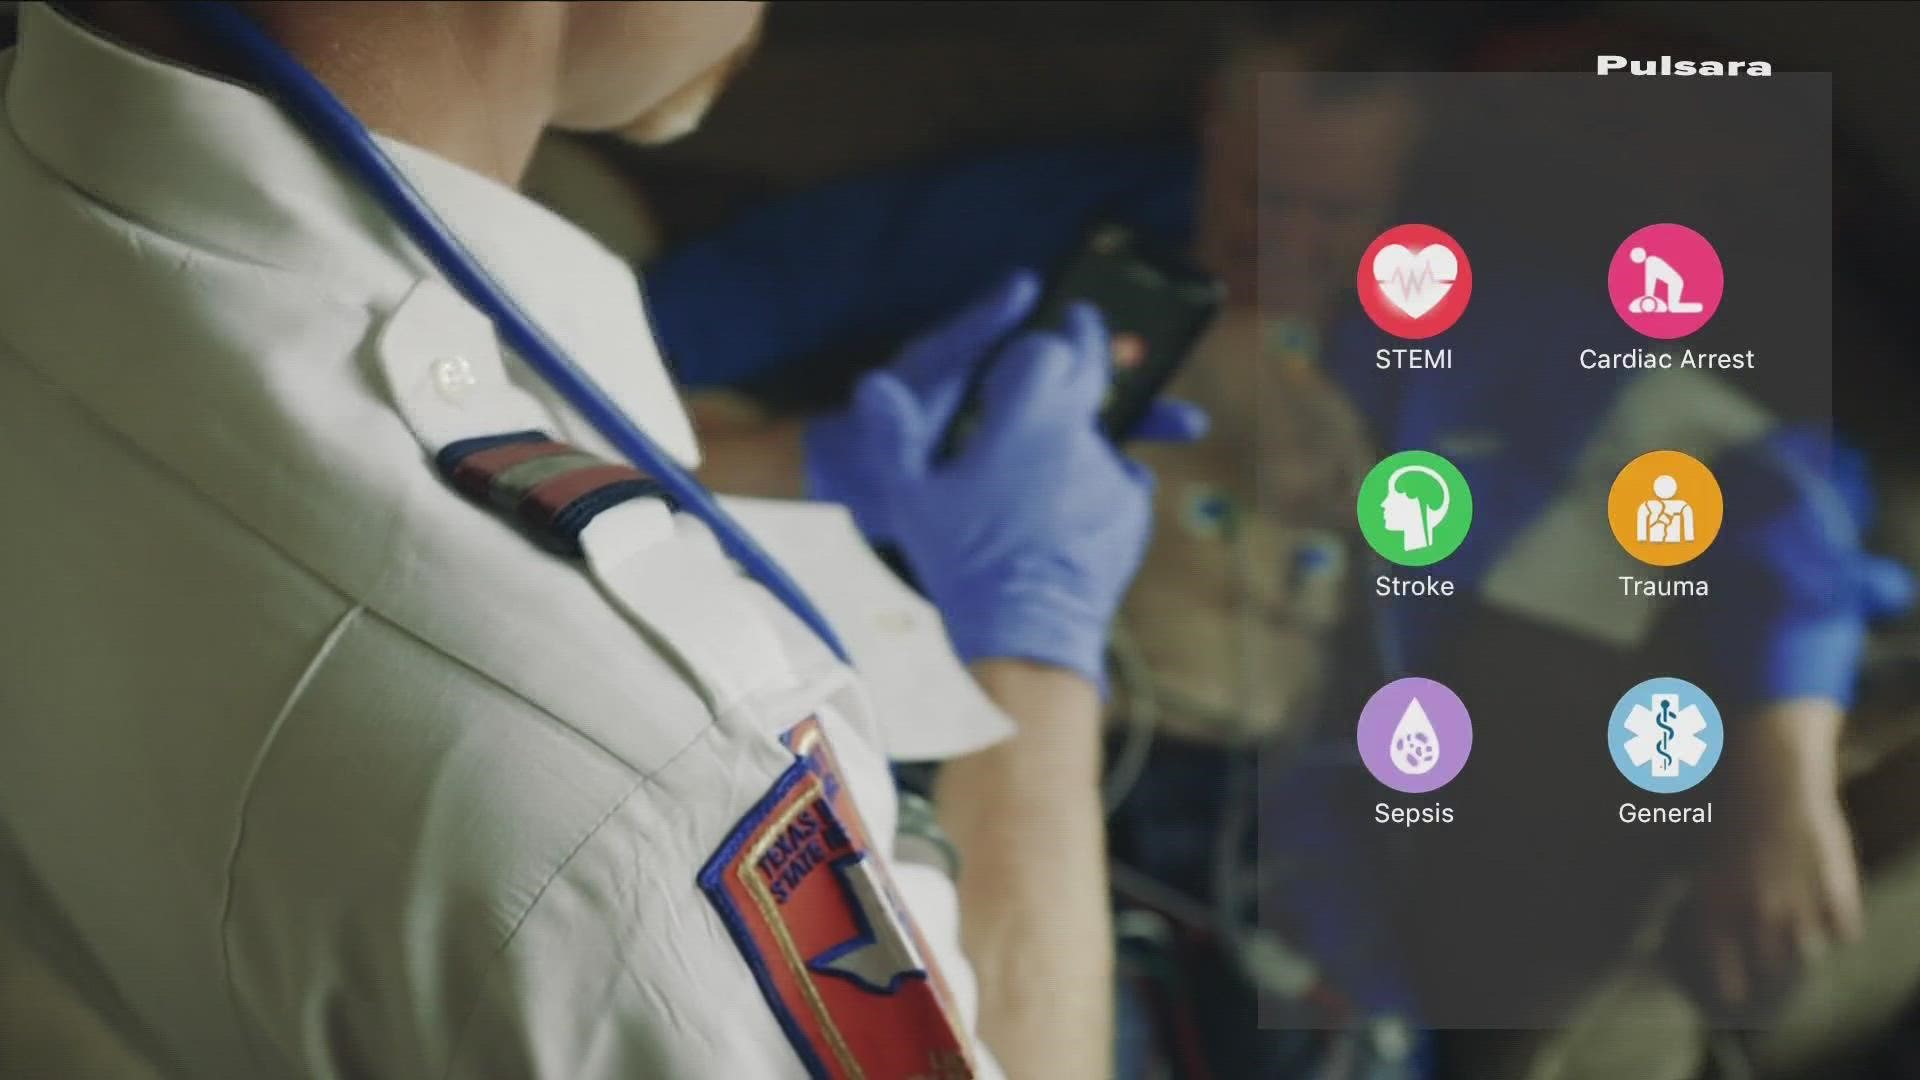 App helps coordinate care between EMS and ER